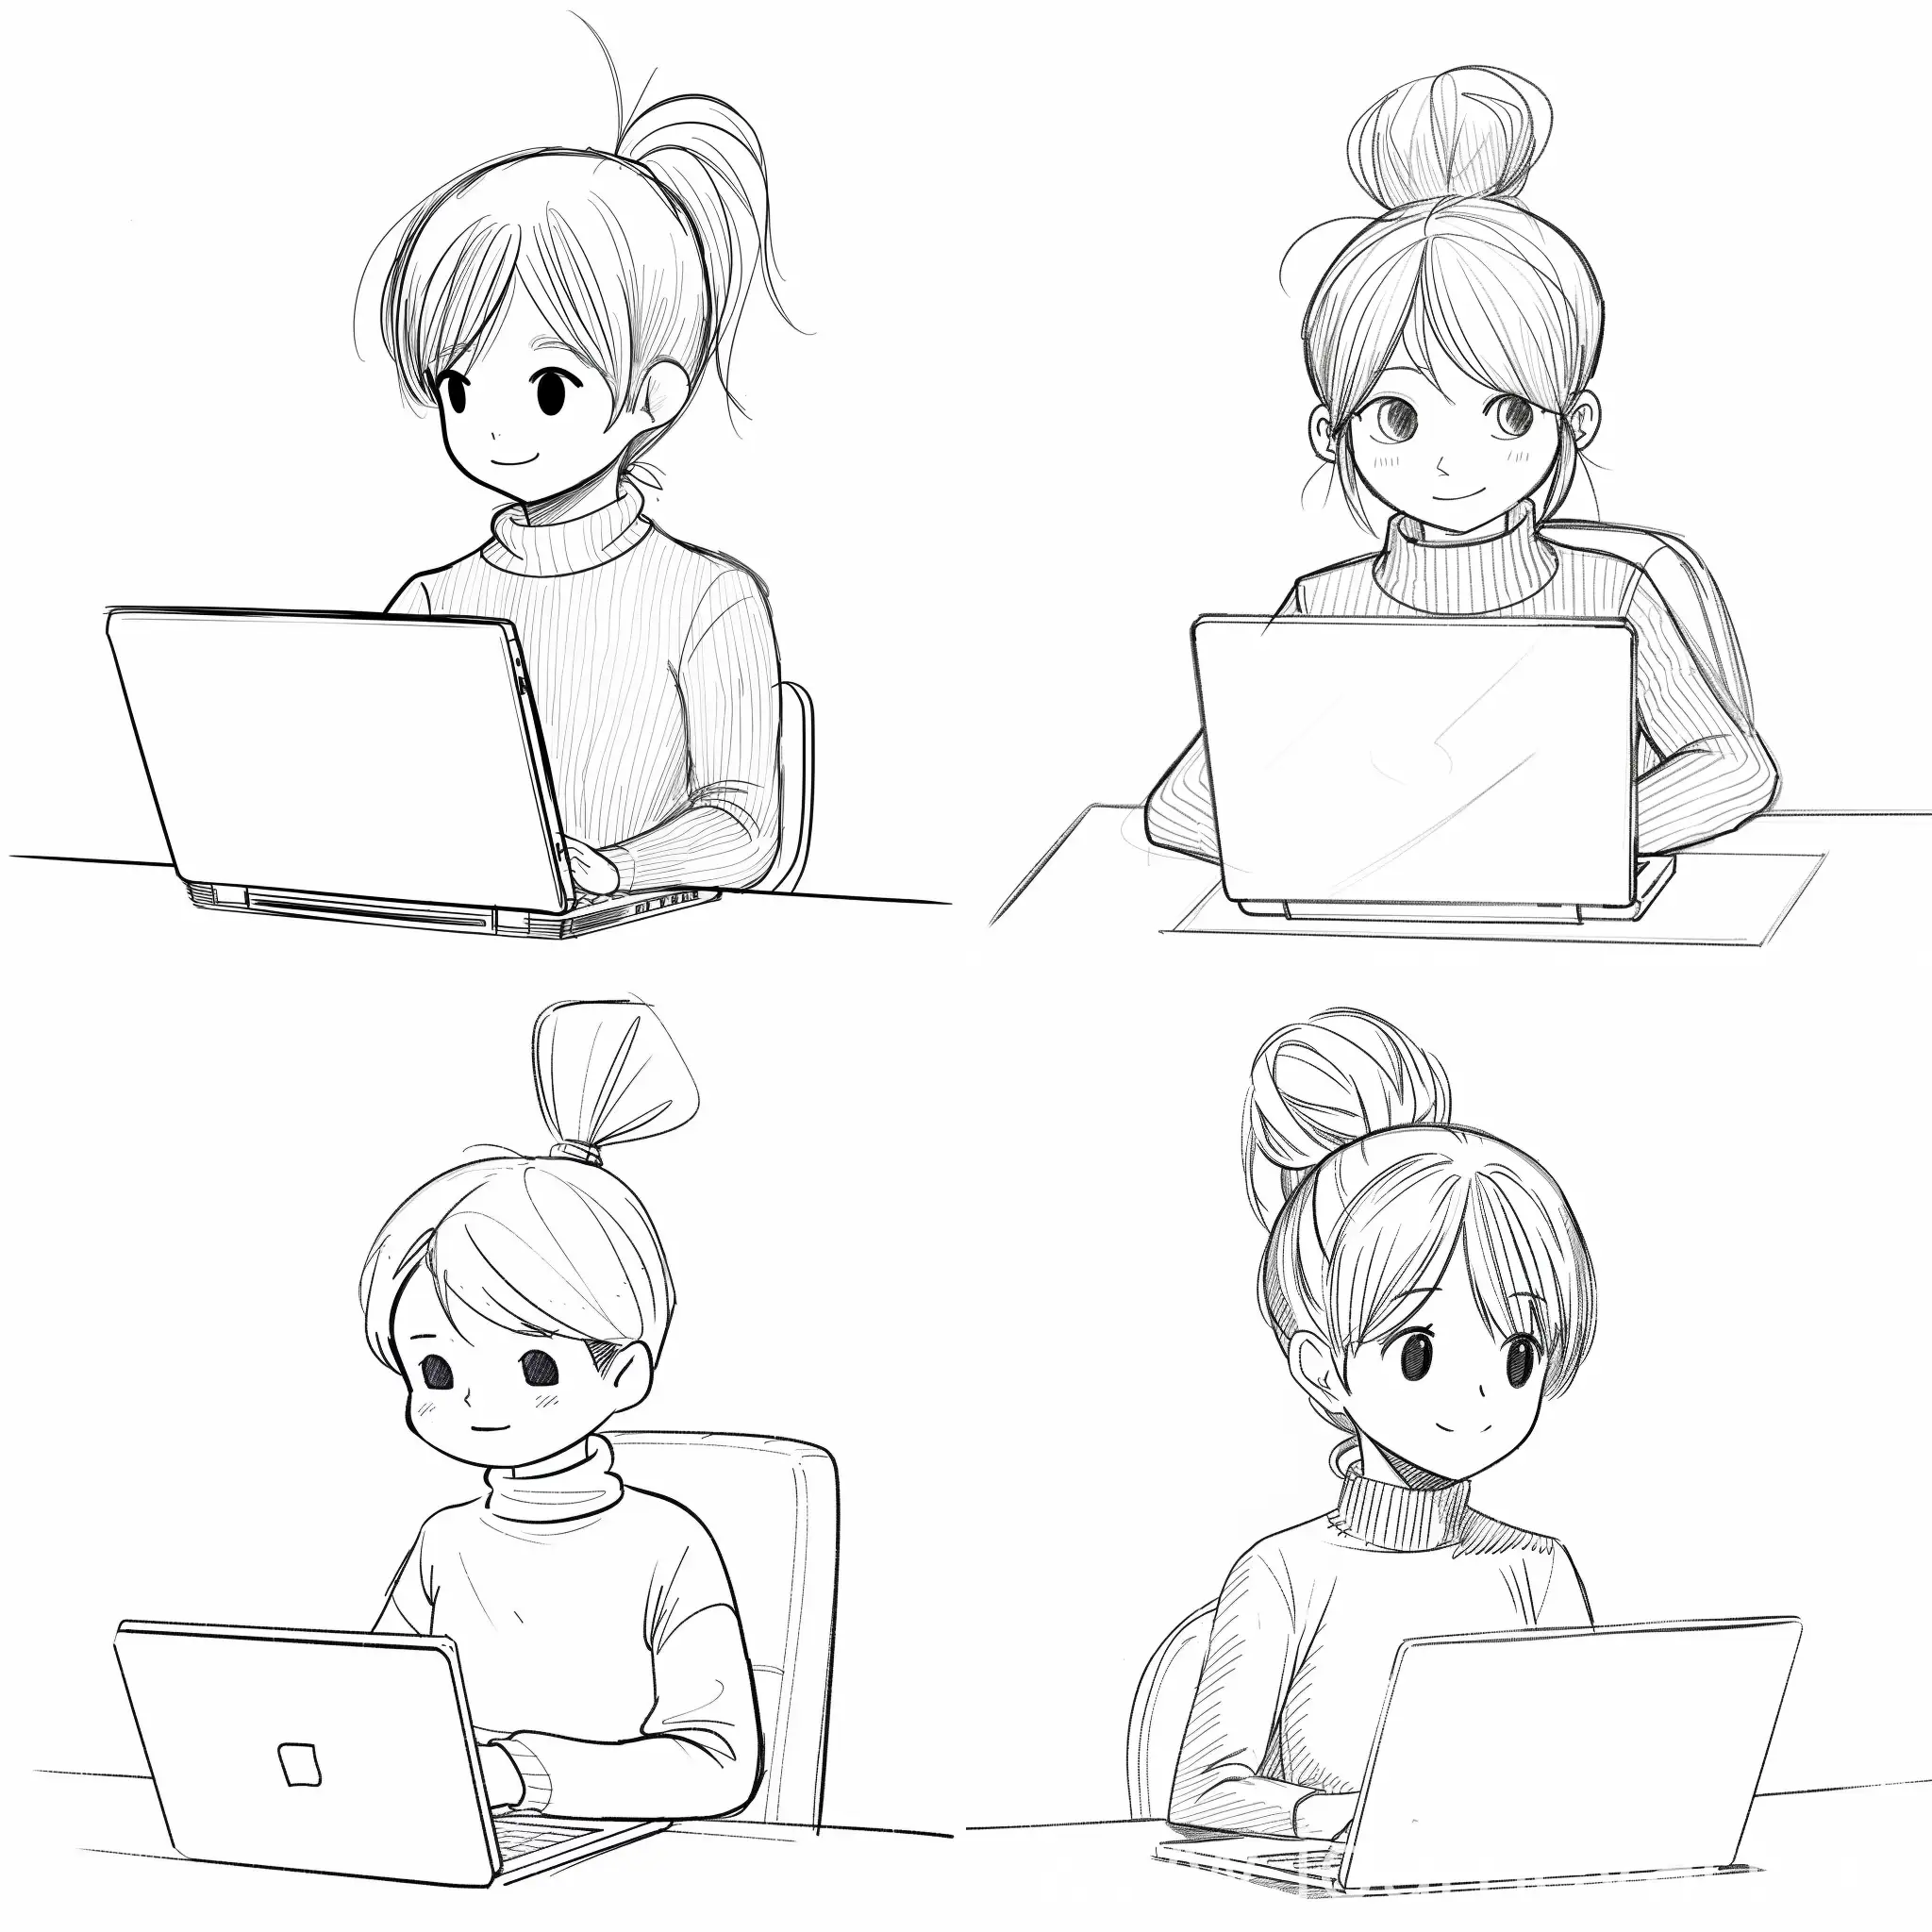 Minimalist-Cartoon-Character-with-Ponytail-Working-on-Laptop